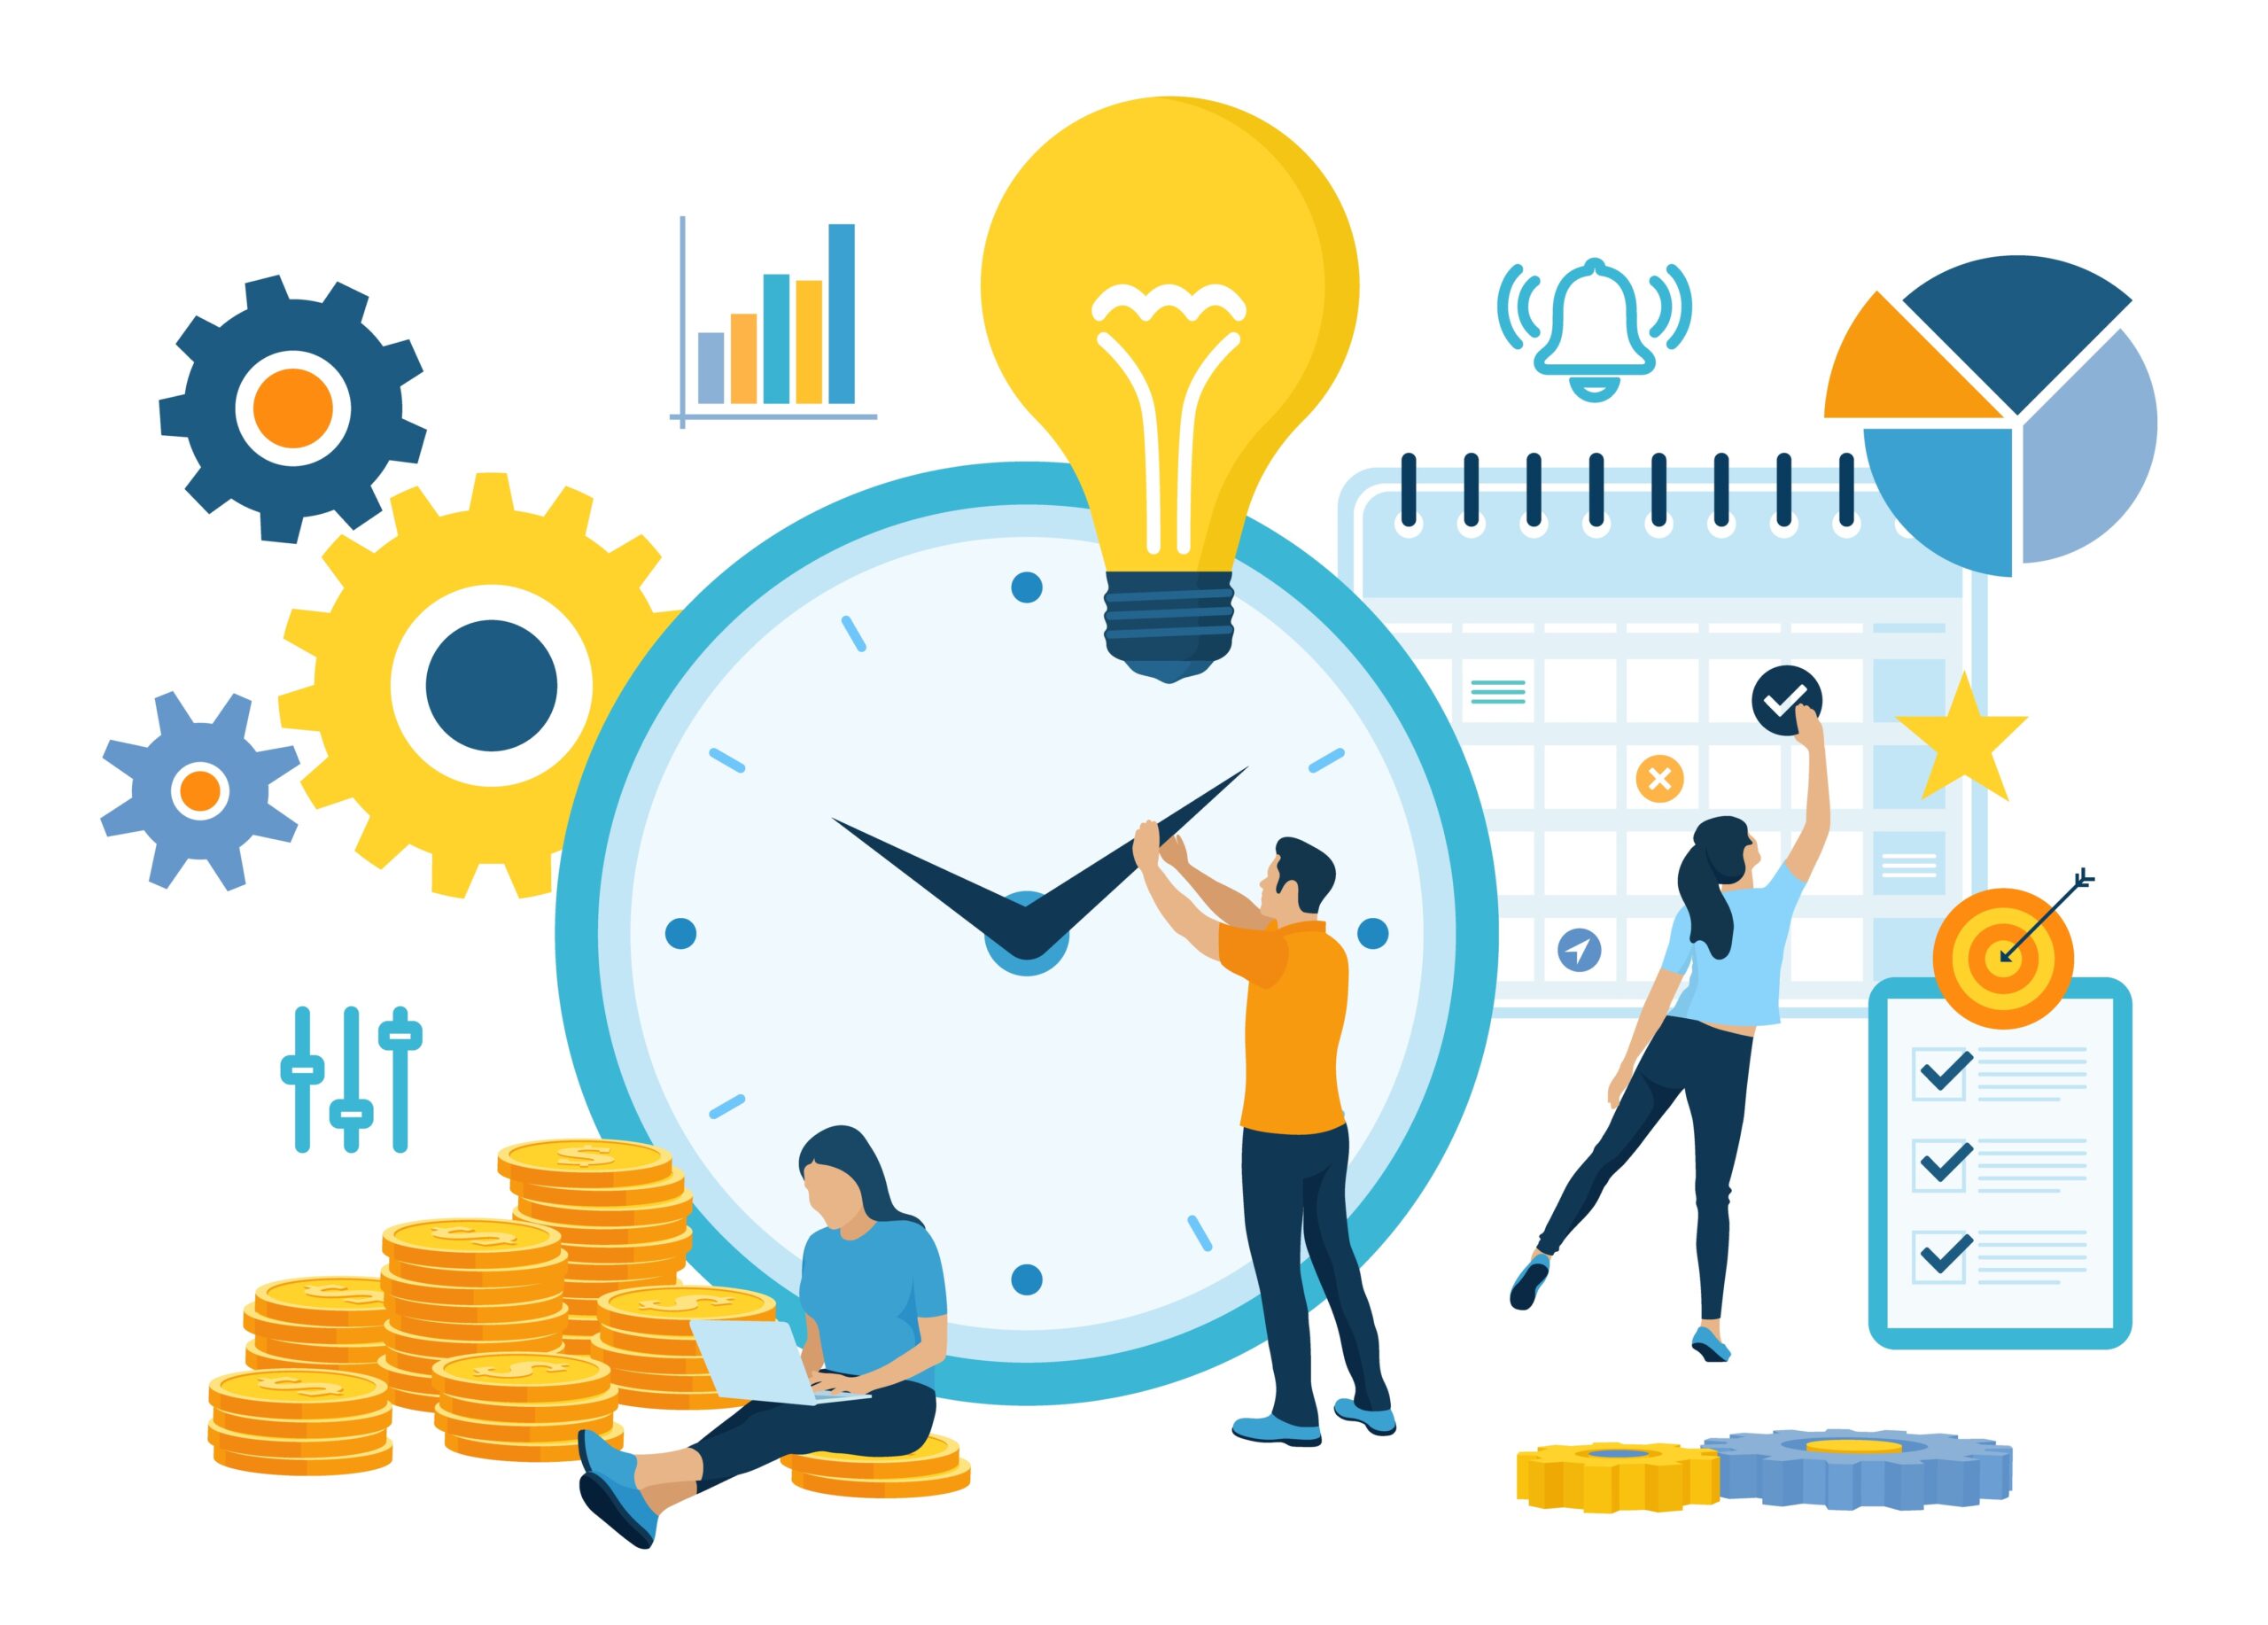 Vector illustration depicting interrelated concepts of time management, planning, and financial success. [Being a Frontline Fundraiser is NOT a 9 to 5 Job!]